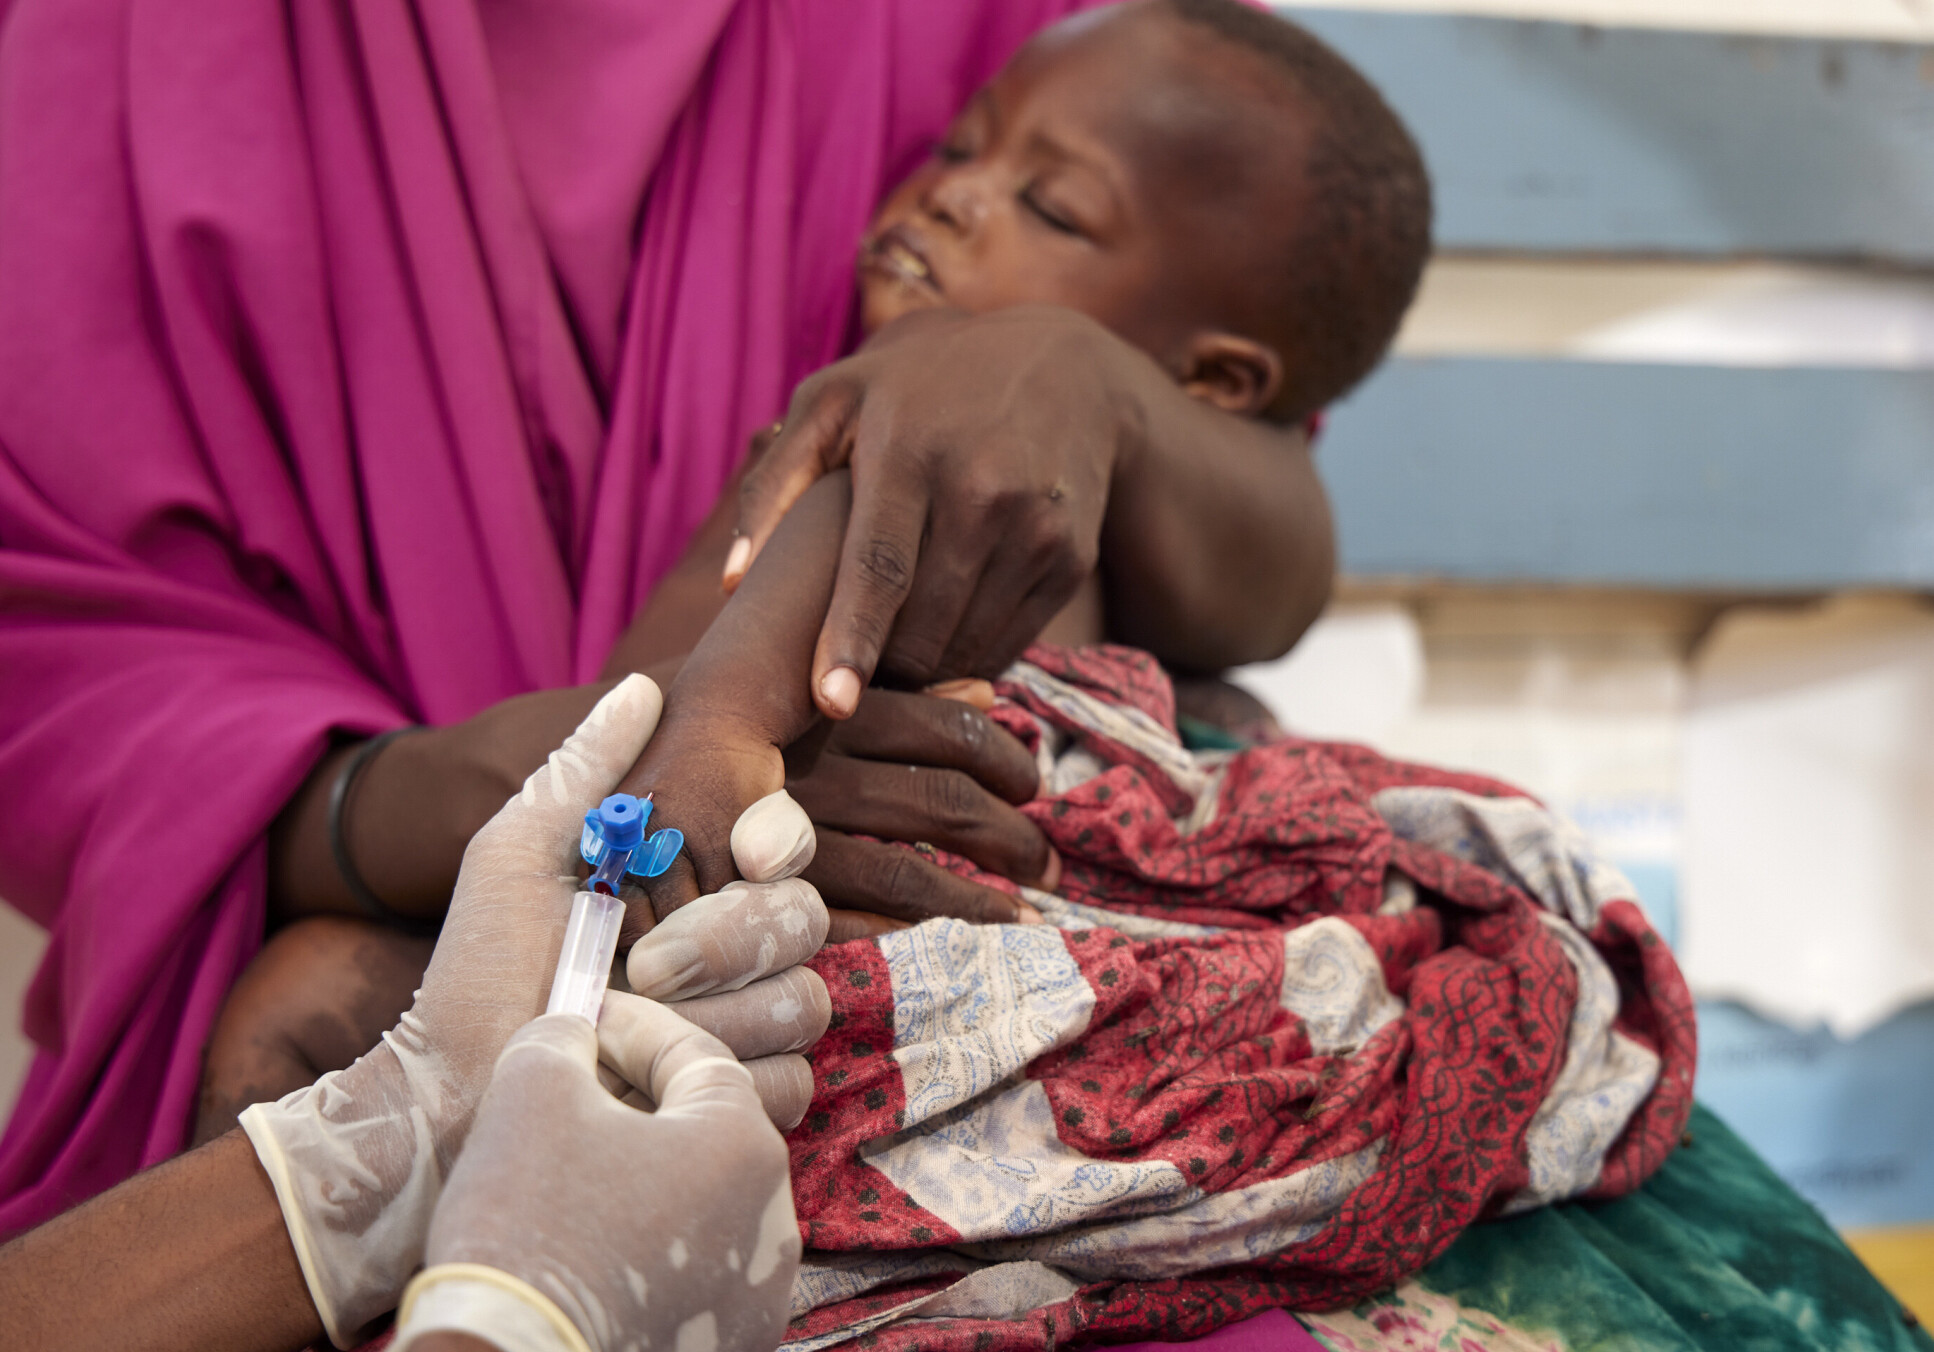 A mother holds a baby that is being treated for malnutrition in Somalia, as a doctor wearing rubber gloves inserts a needle into the baby's hand. 